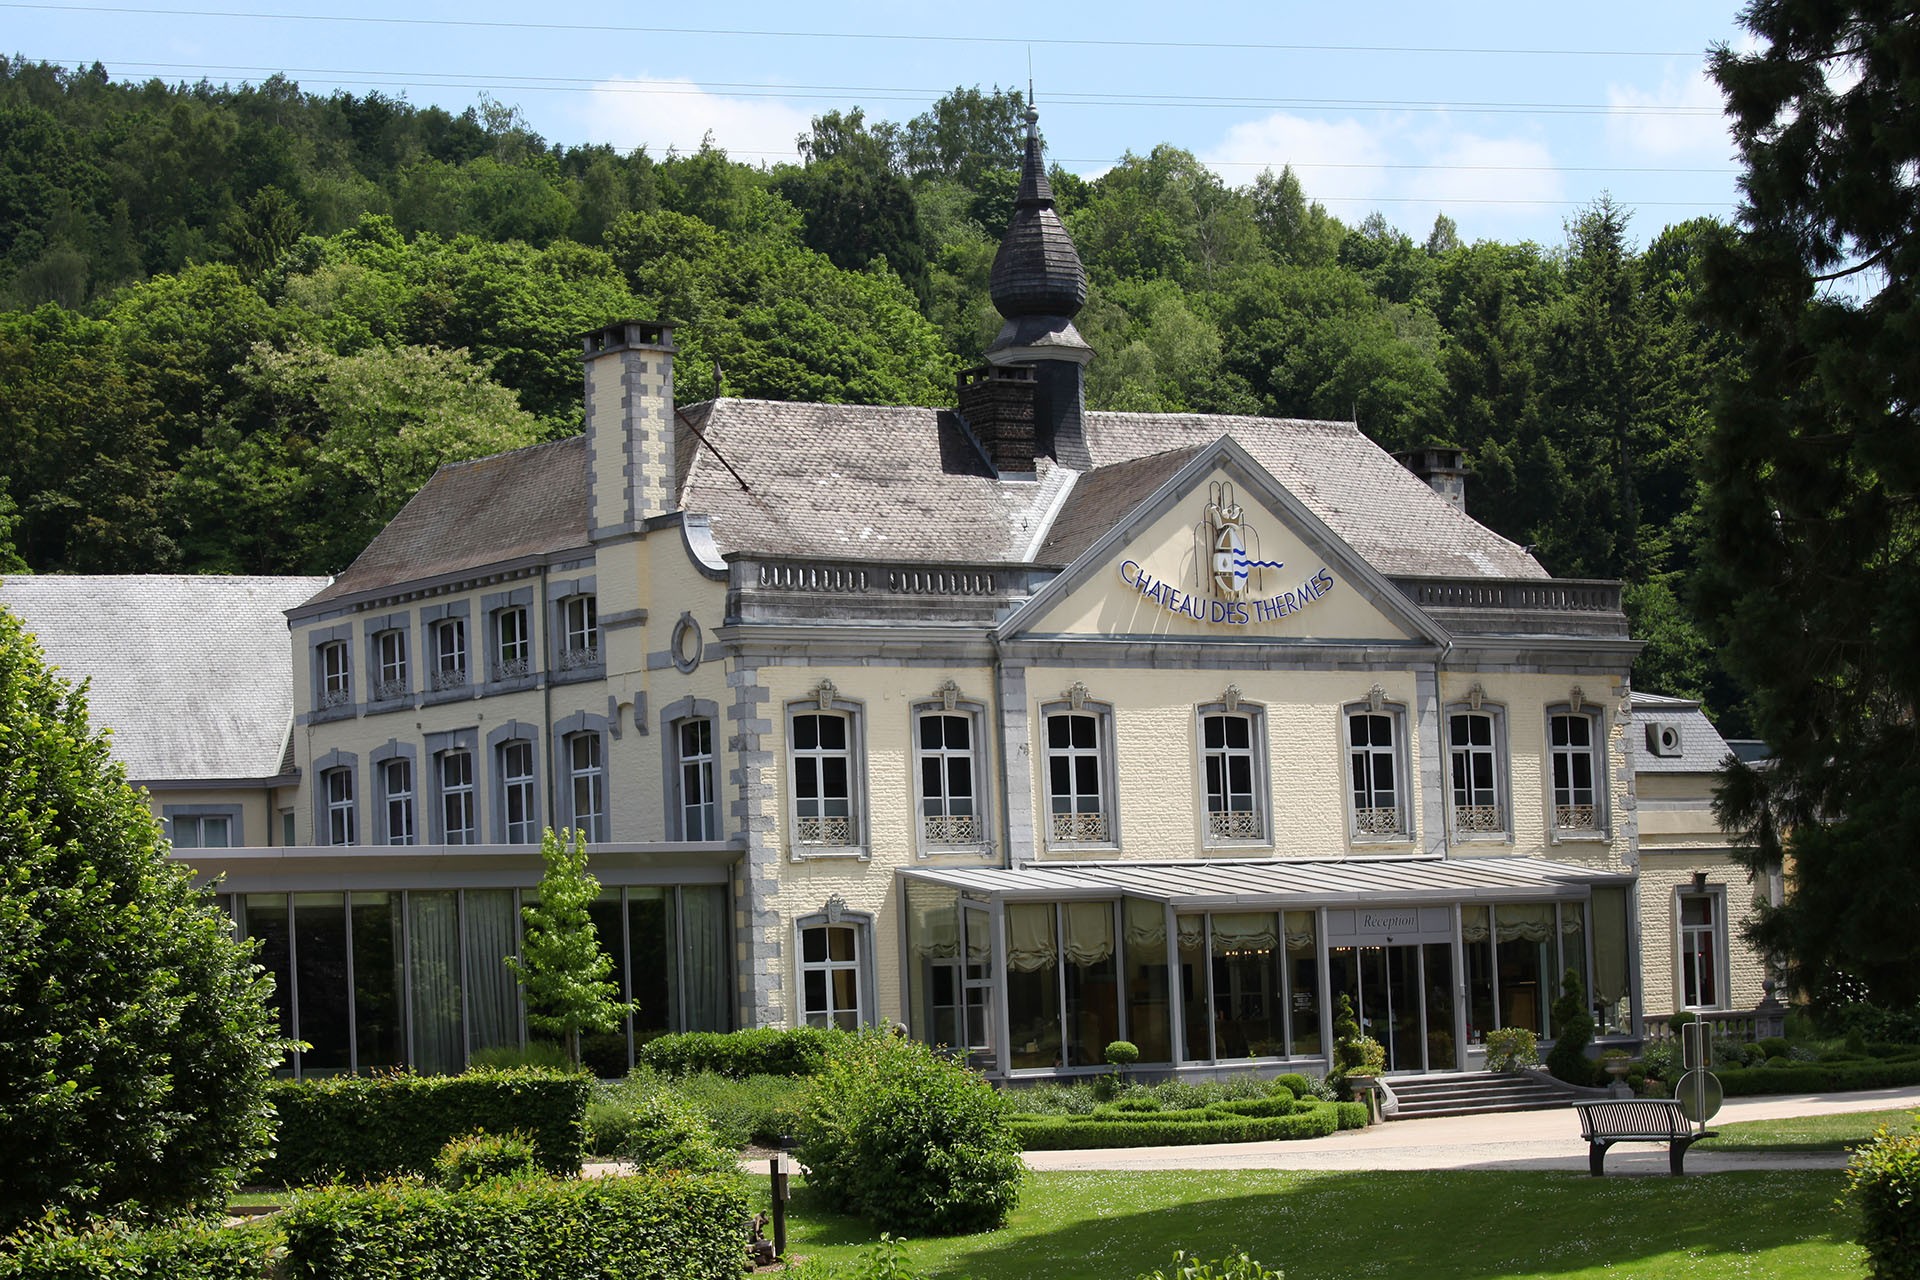 Château des Thermes in Chaudfontaine